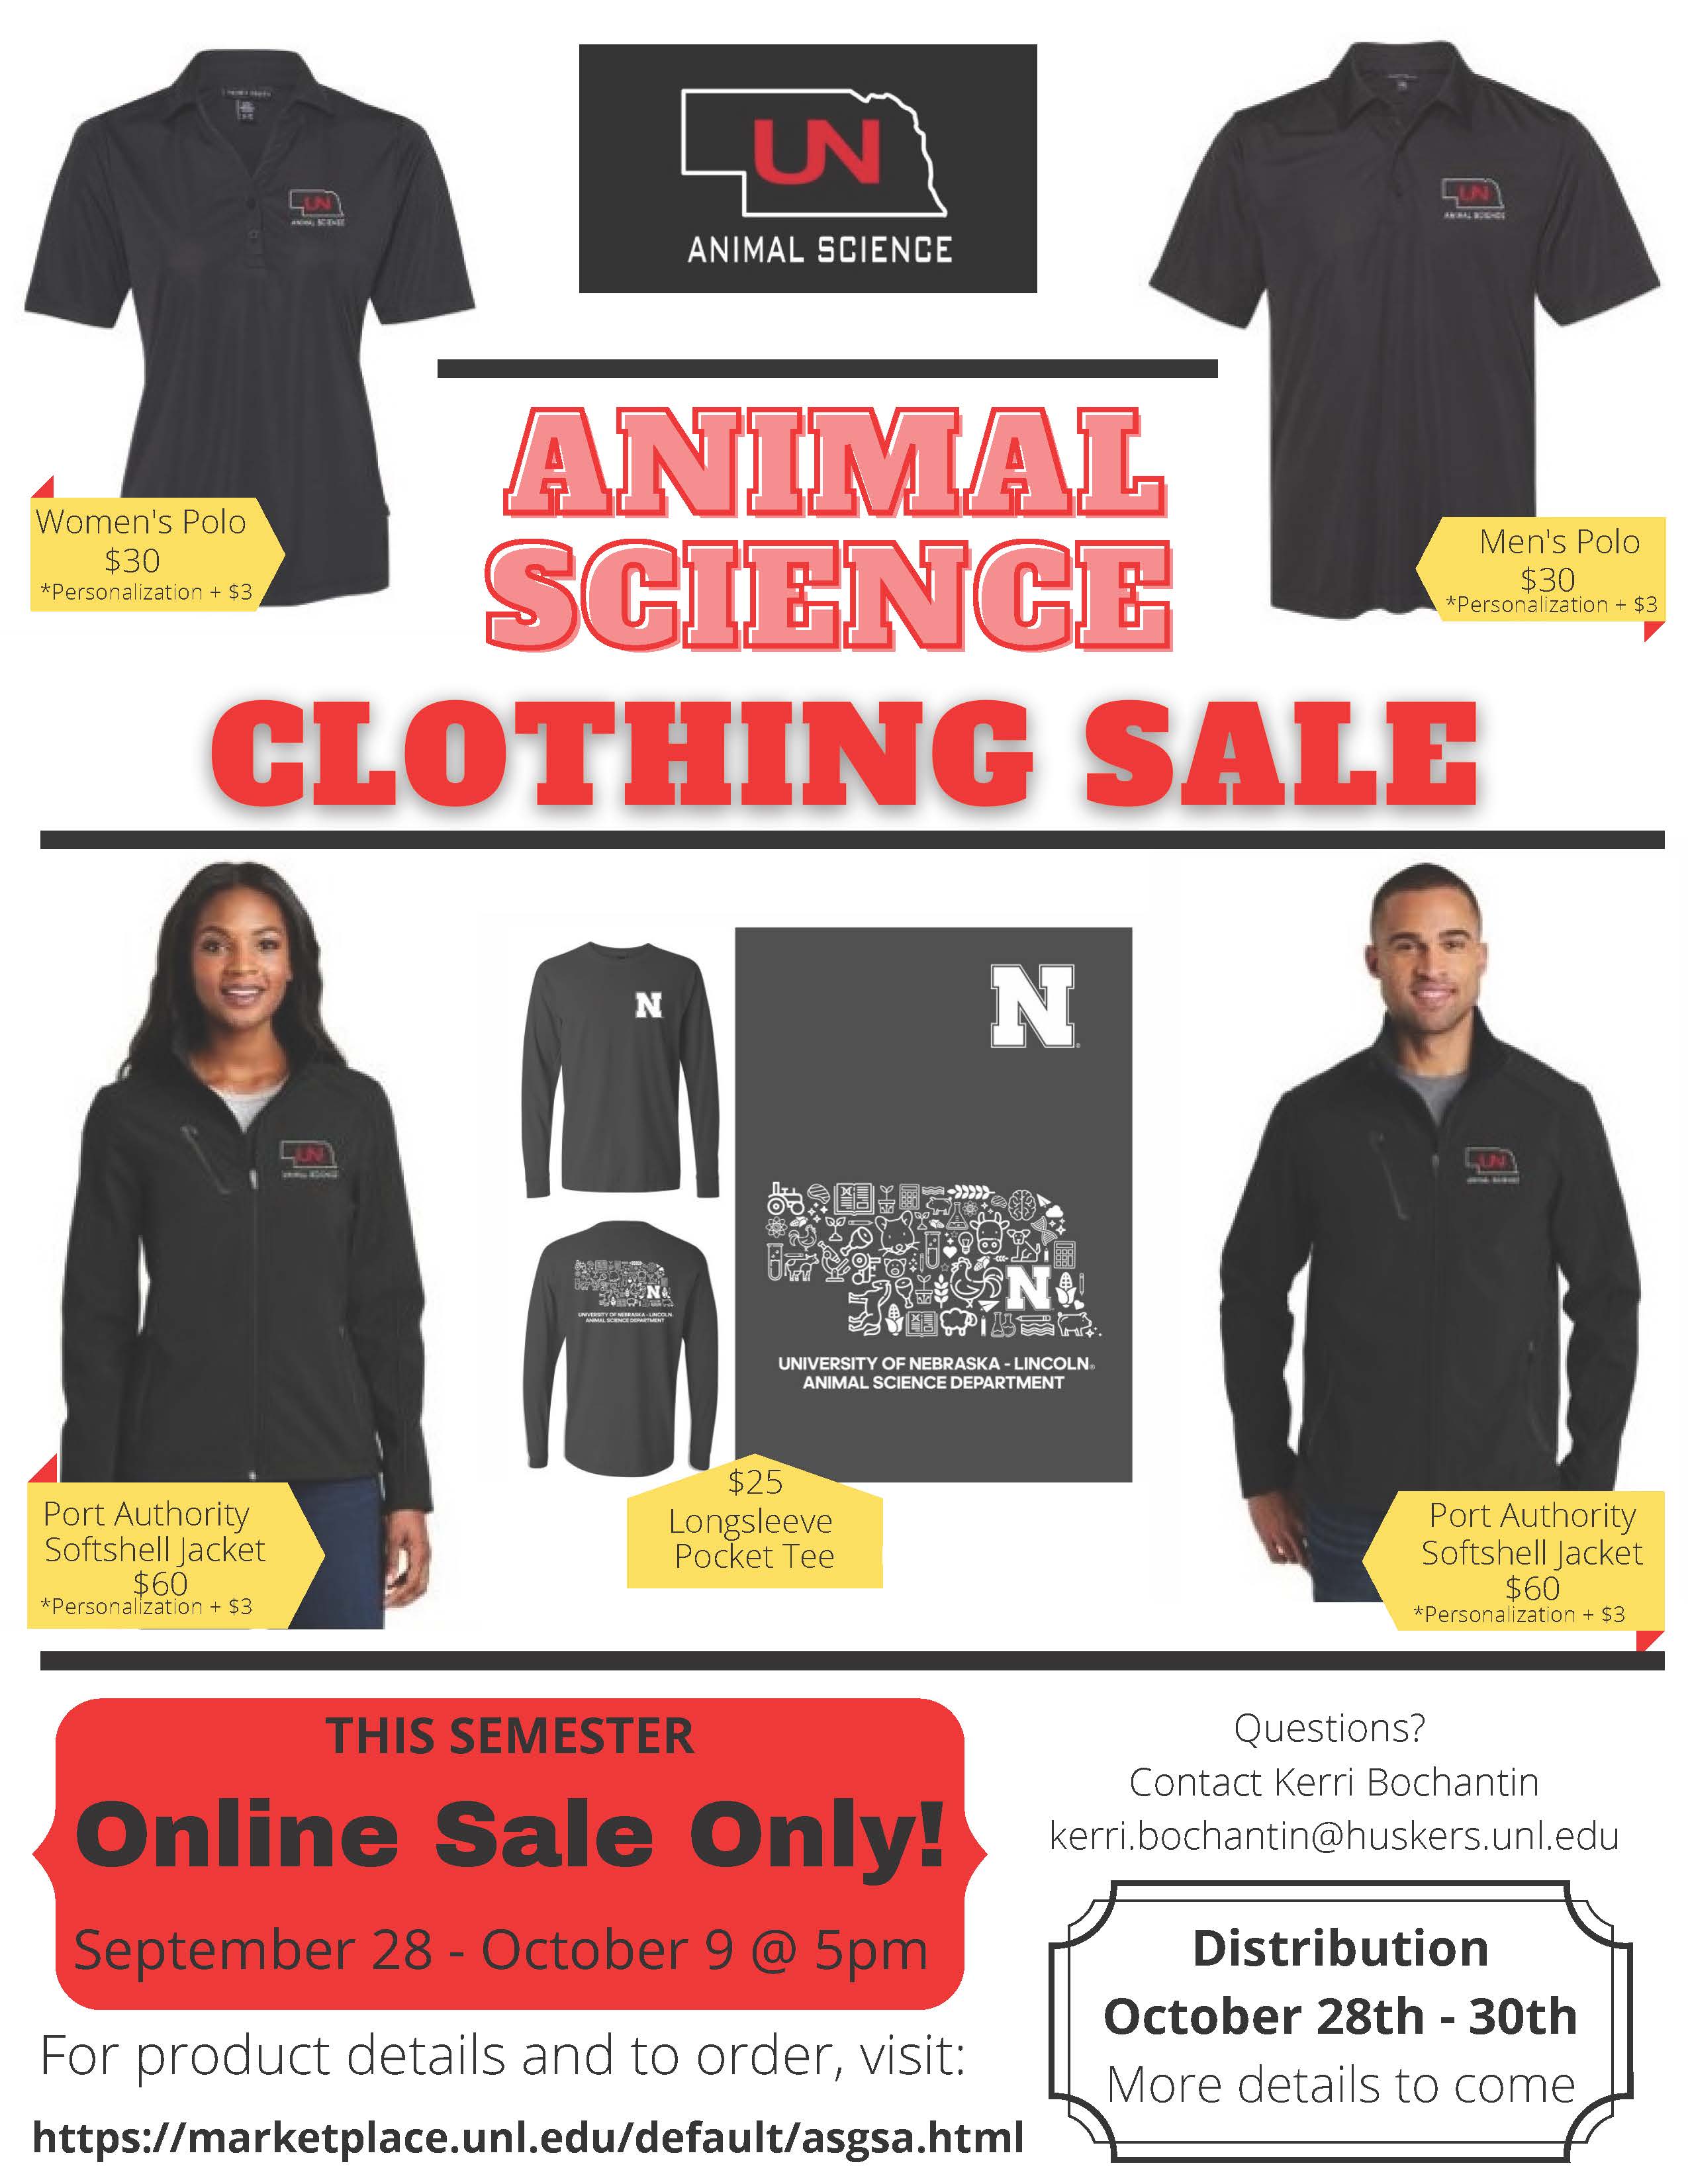 Flyer showing clothing options